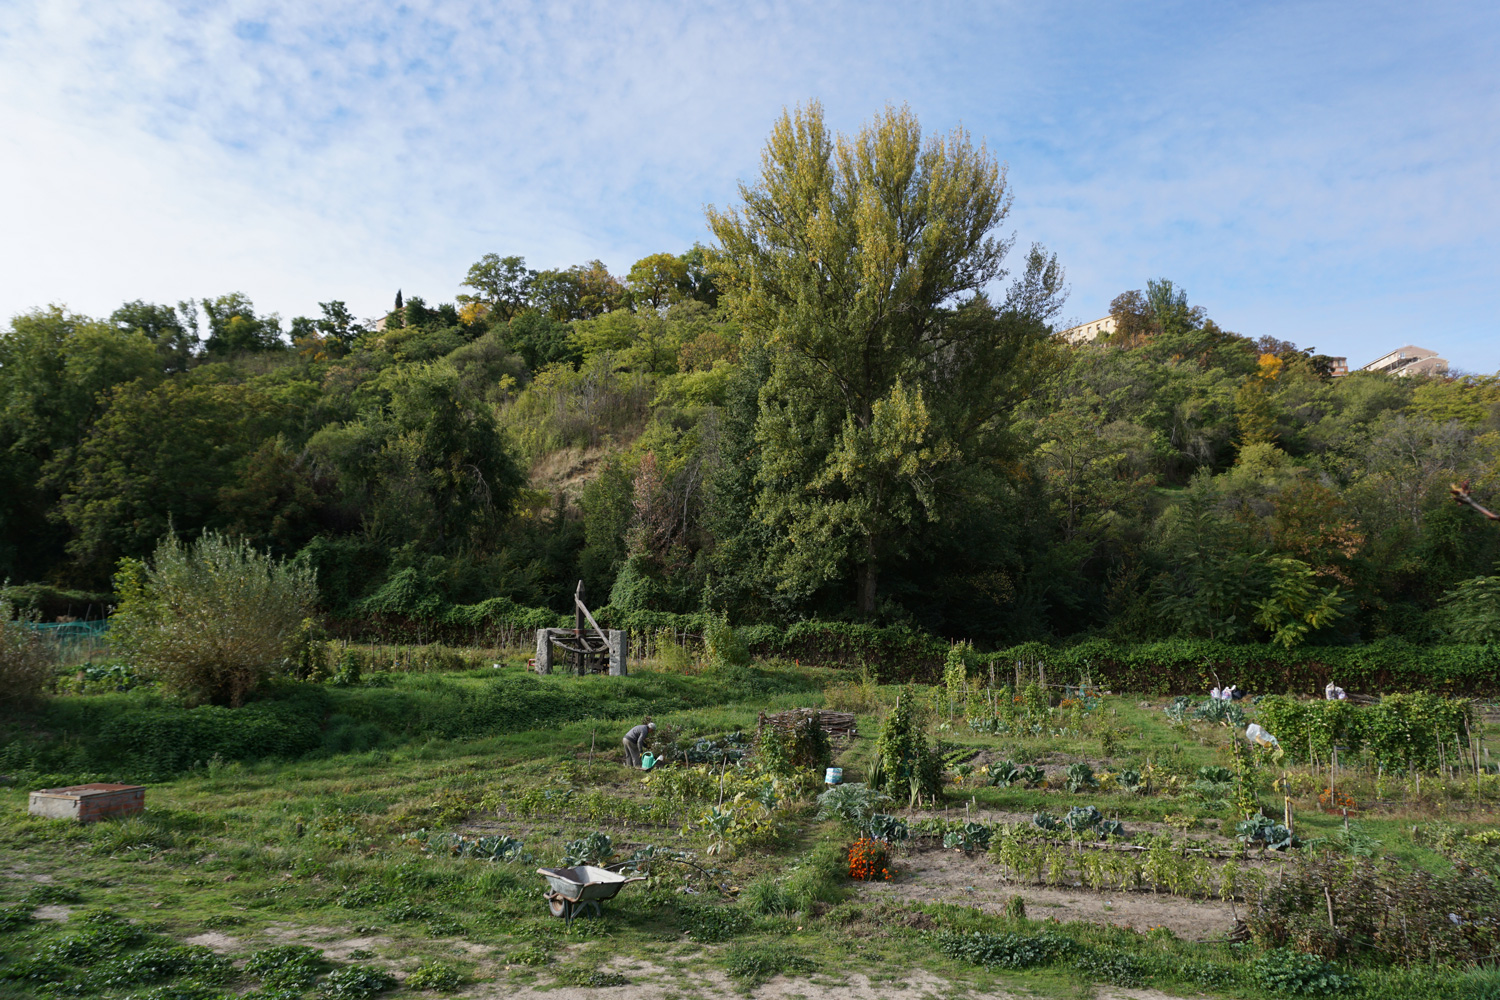 Recovering biodiversity in historic urban orchards